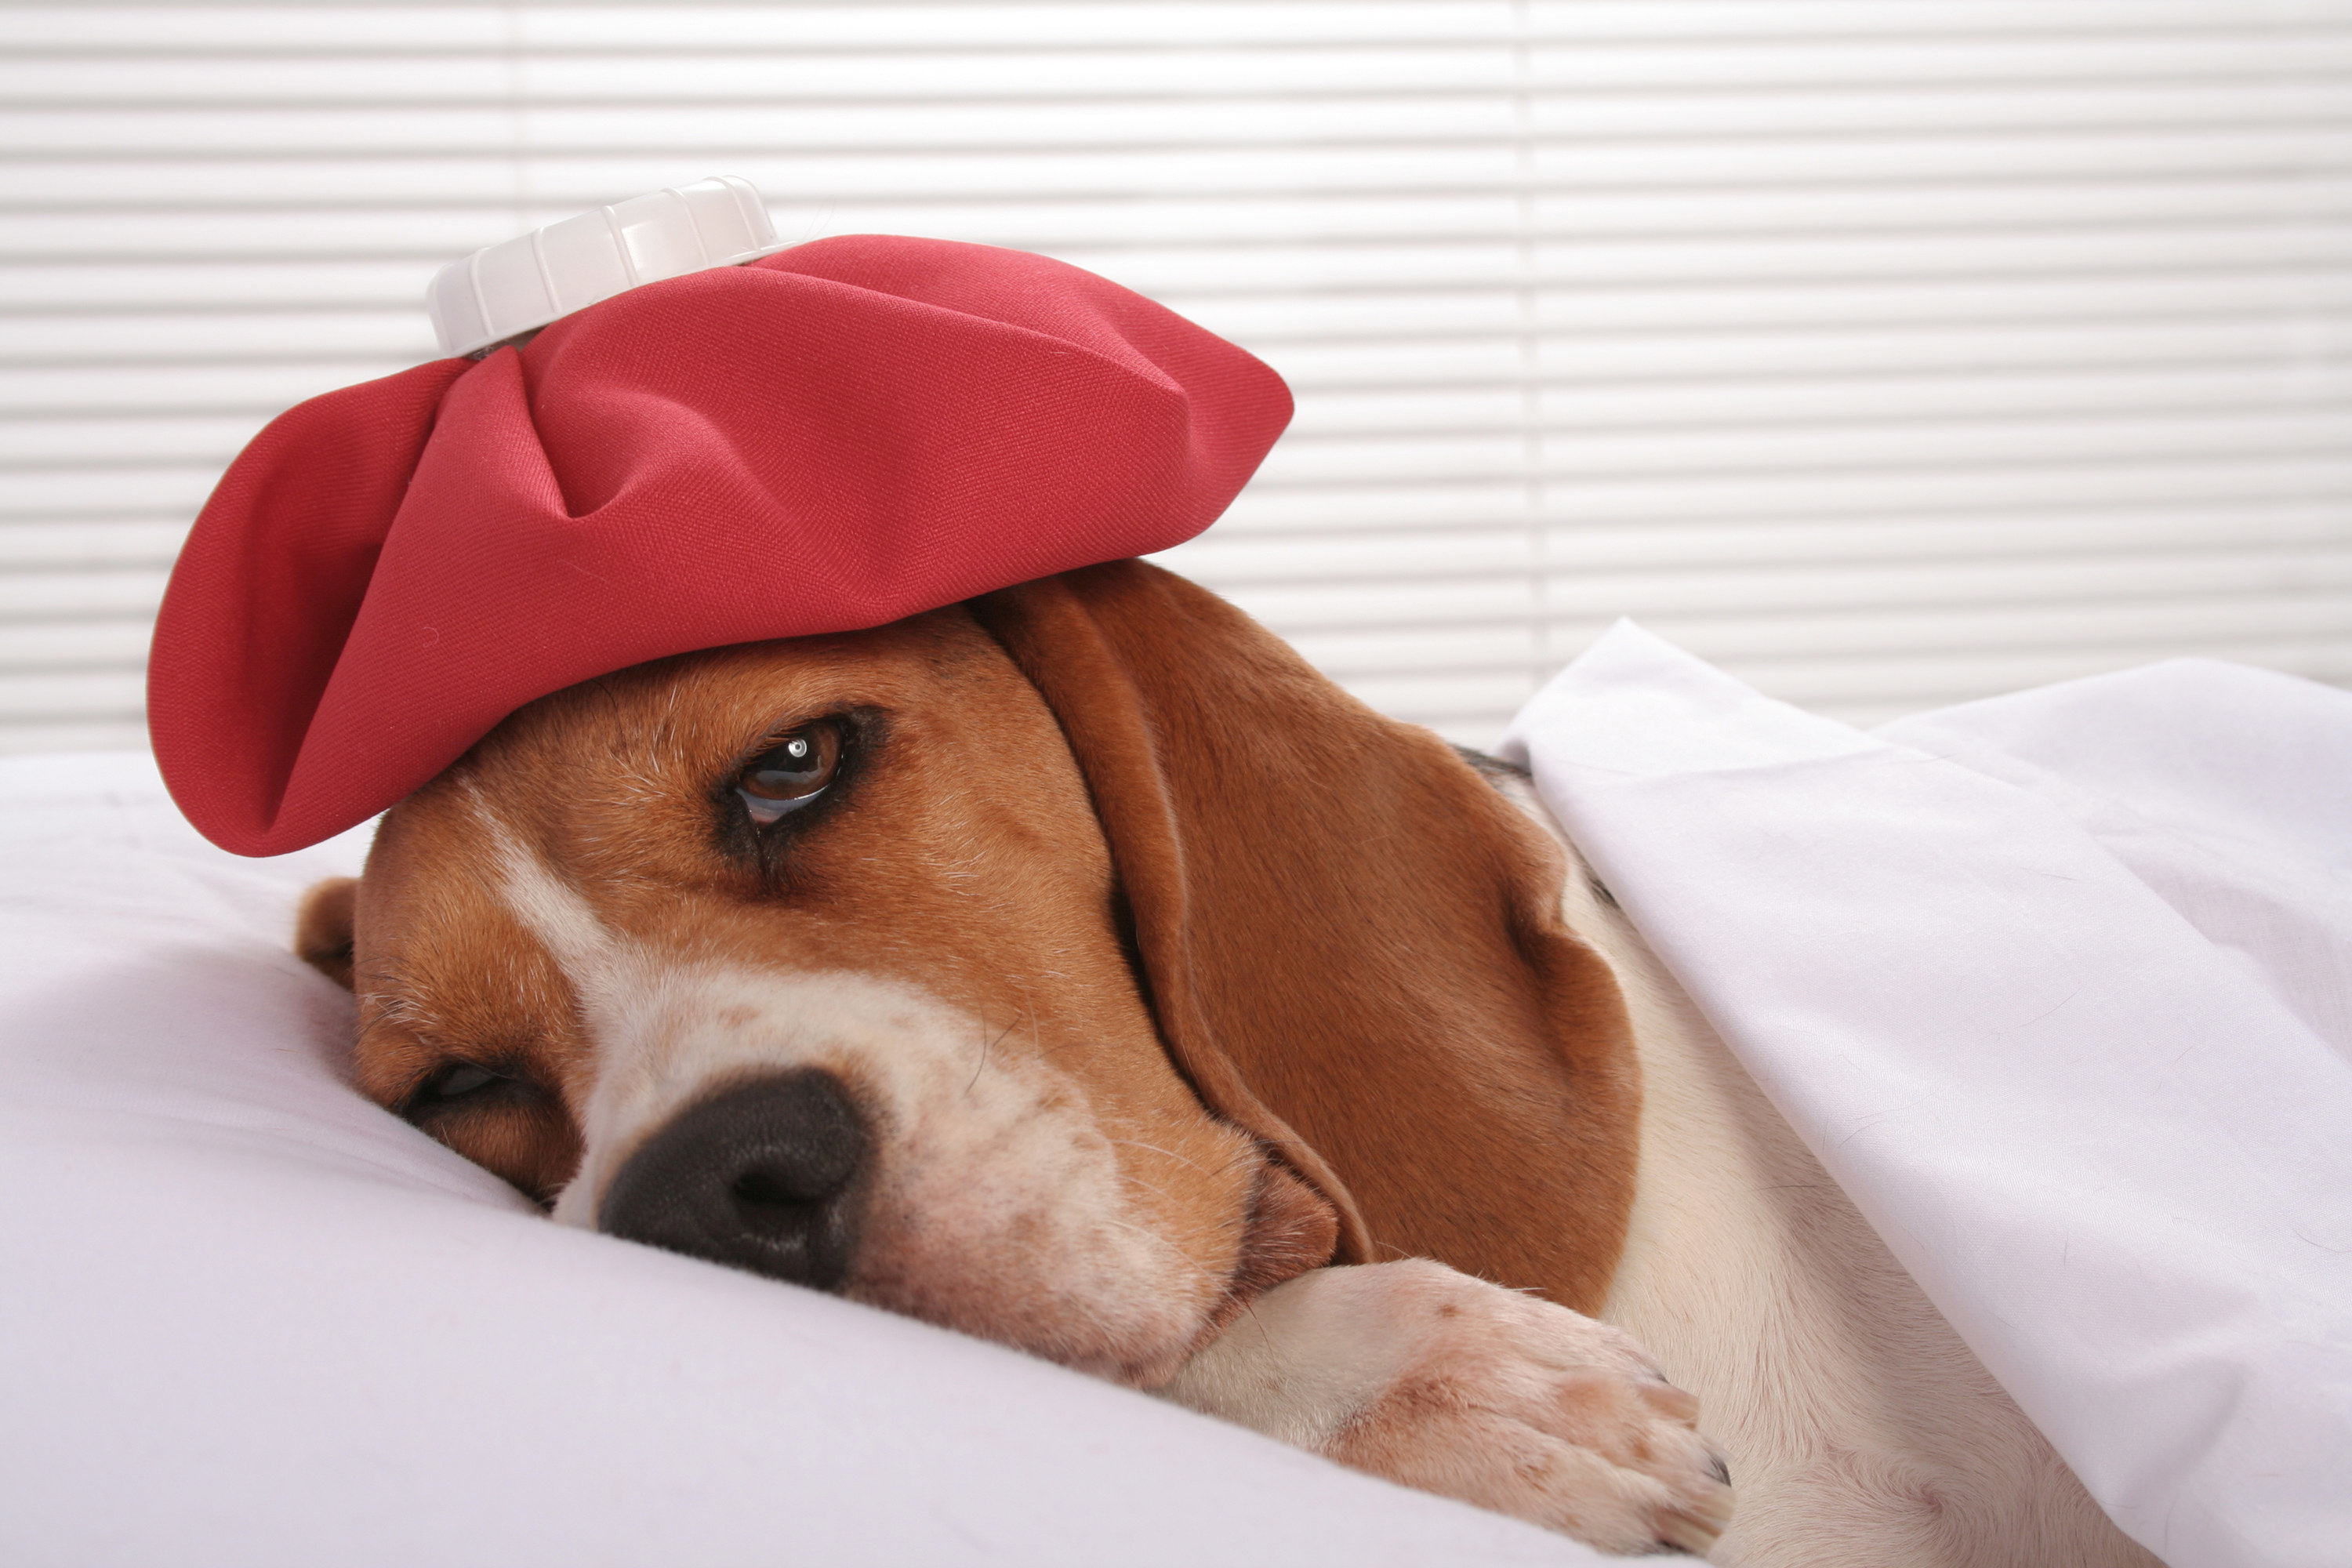 A dog sleeping in a bed with an ice pack on its head